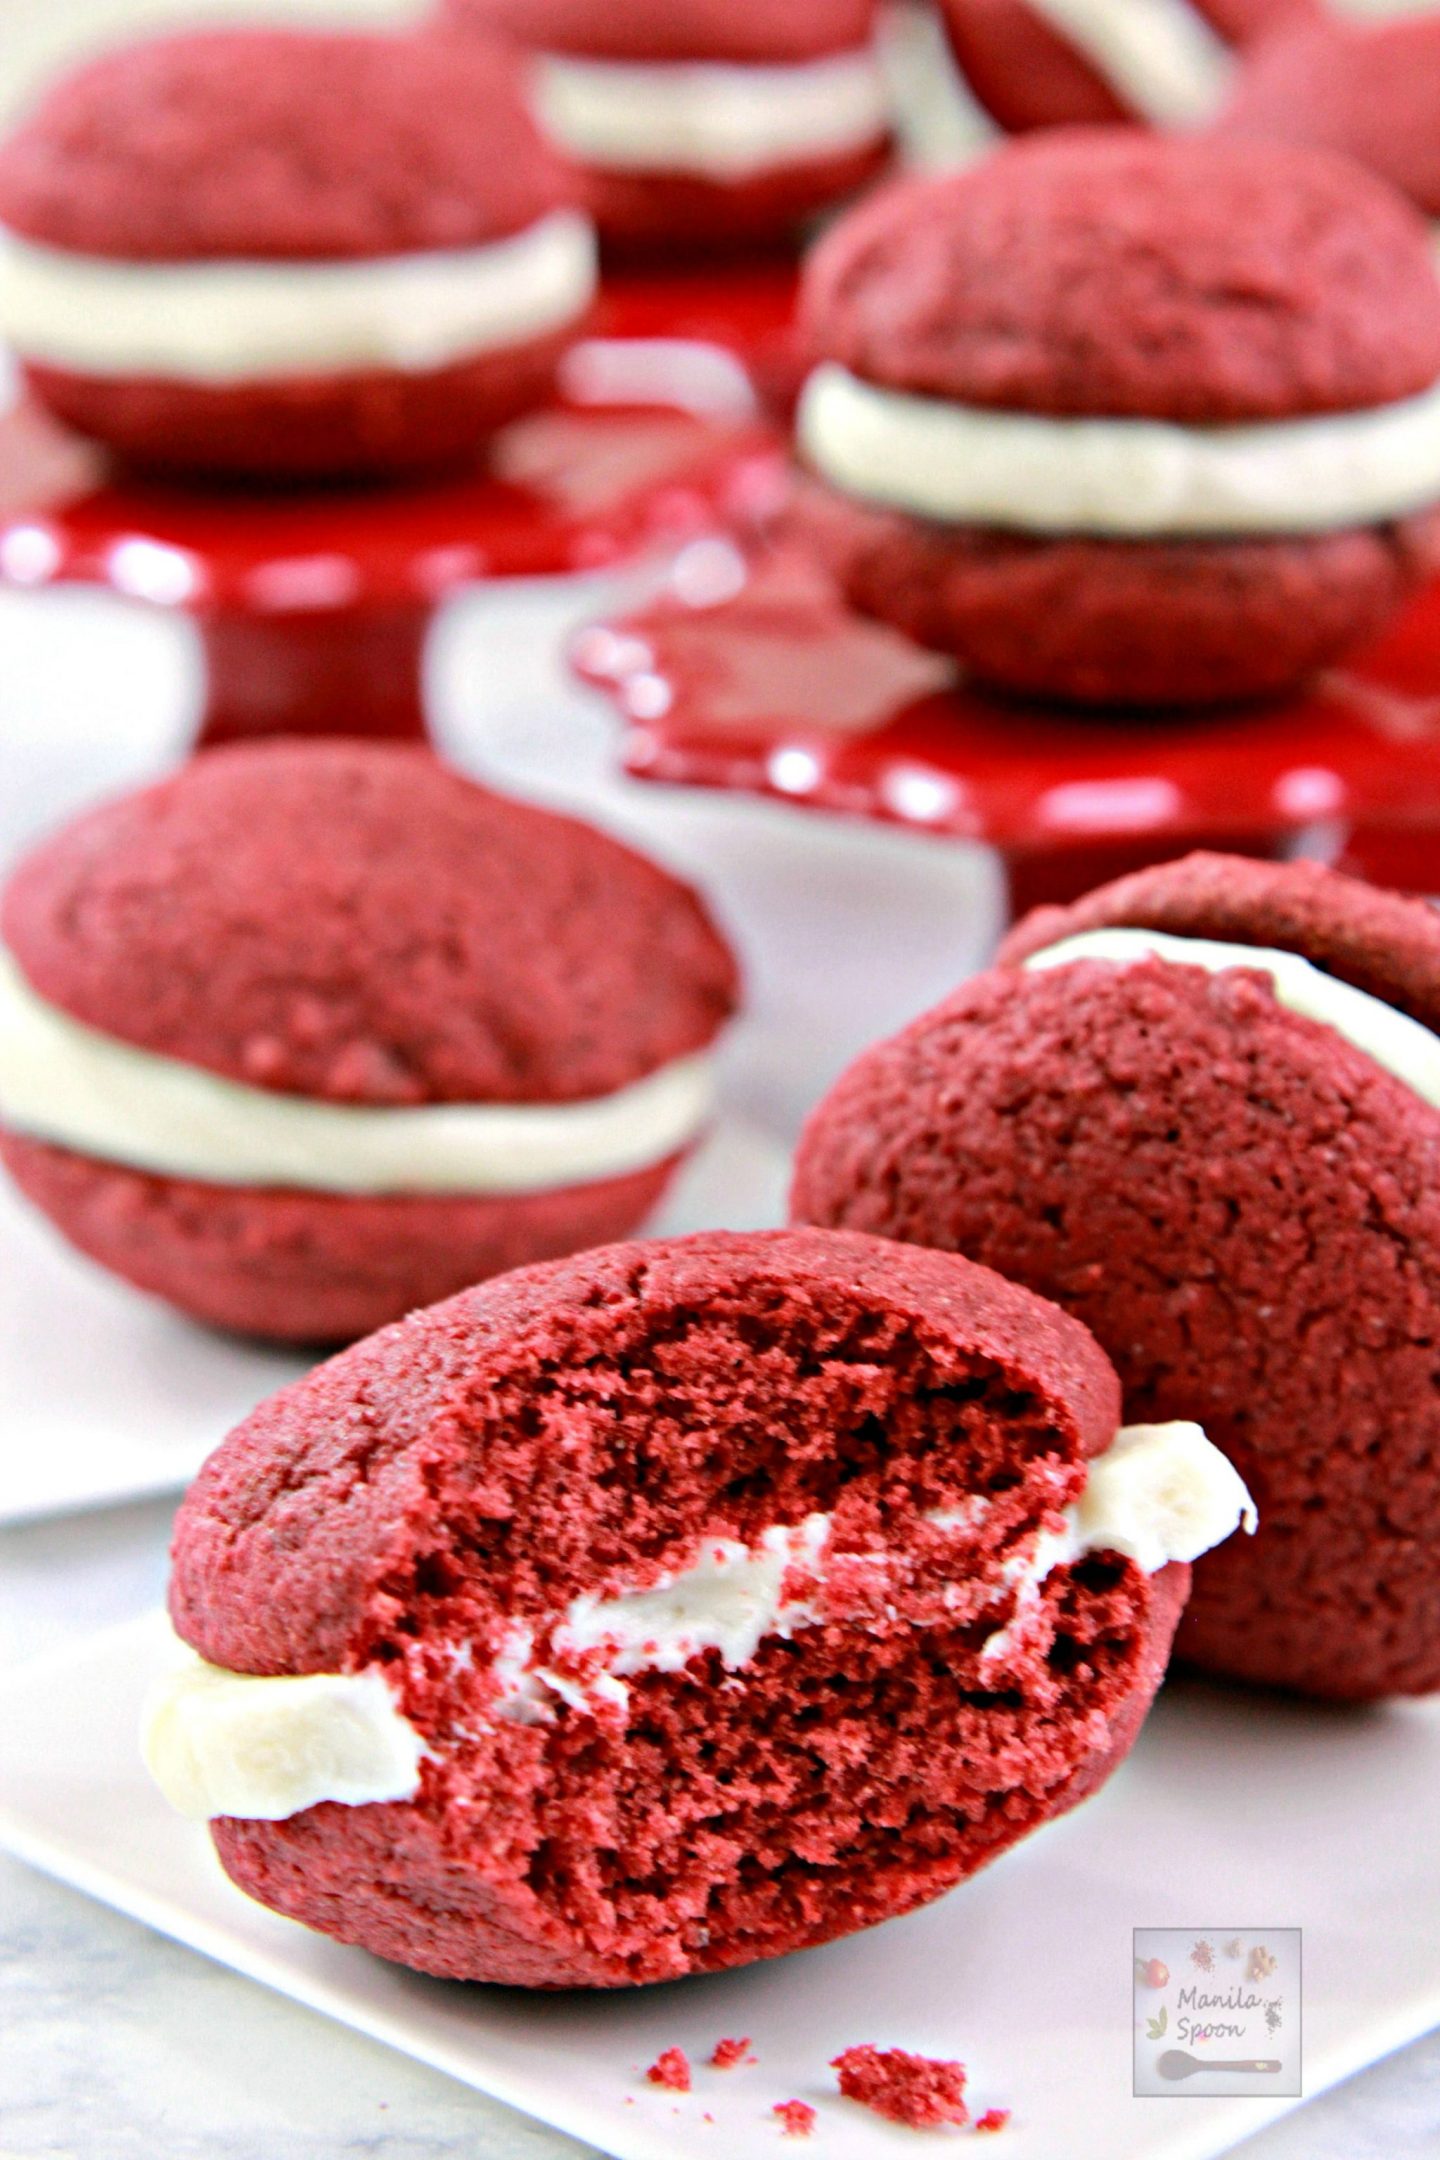 Perfectly delicious sweet treat for Valentine's Day - Red Velvet Whoopie Pies!! Easy to make and looks impressive, too!